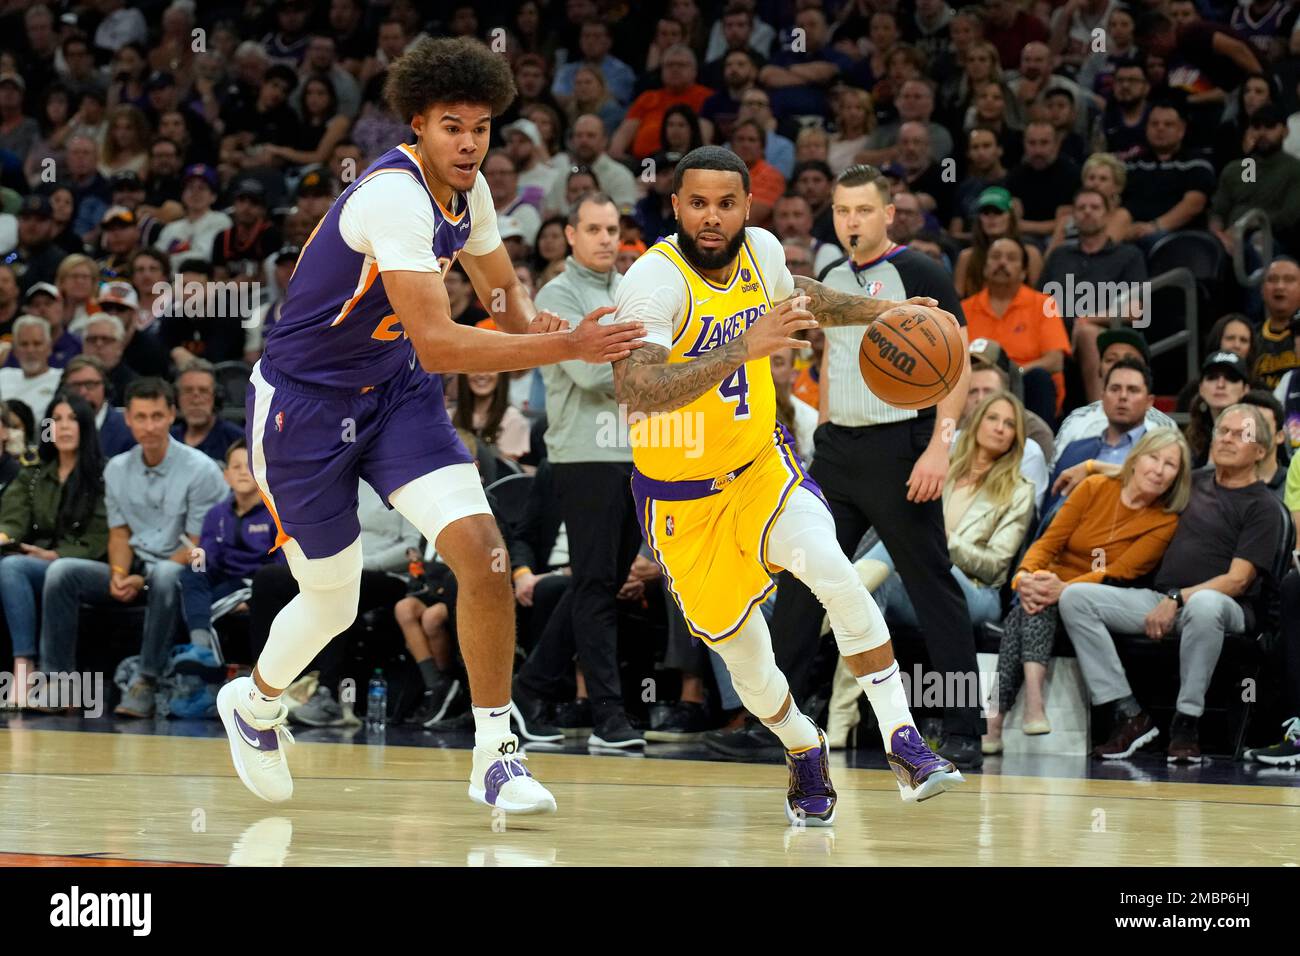 Los Angeles Lakers center D.J. Mbenga, left, takes the ball from Phoenix  Suns guard Steve Nash, right, during the first half of Game 1 of their  Western Conference Finals series at Staples